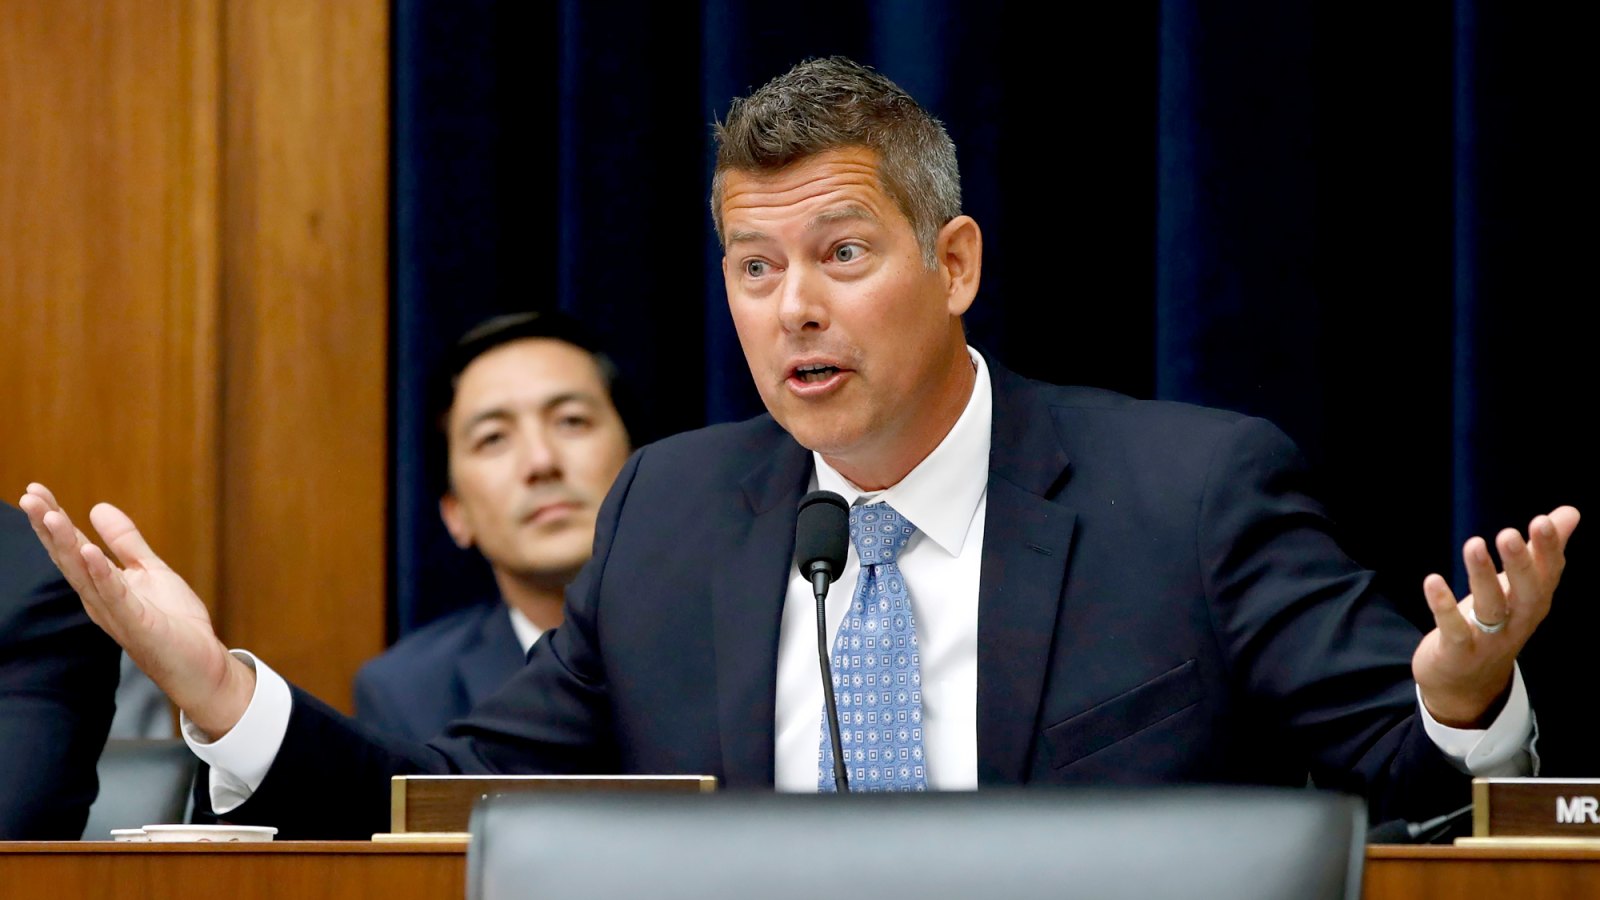 Sean-Duffy-baby-complications-stepping-down